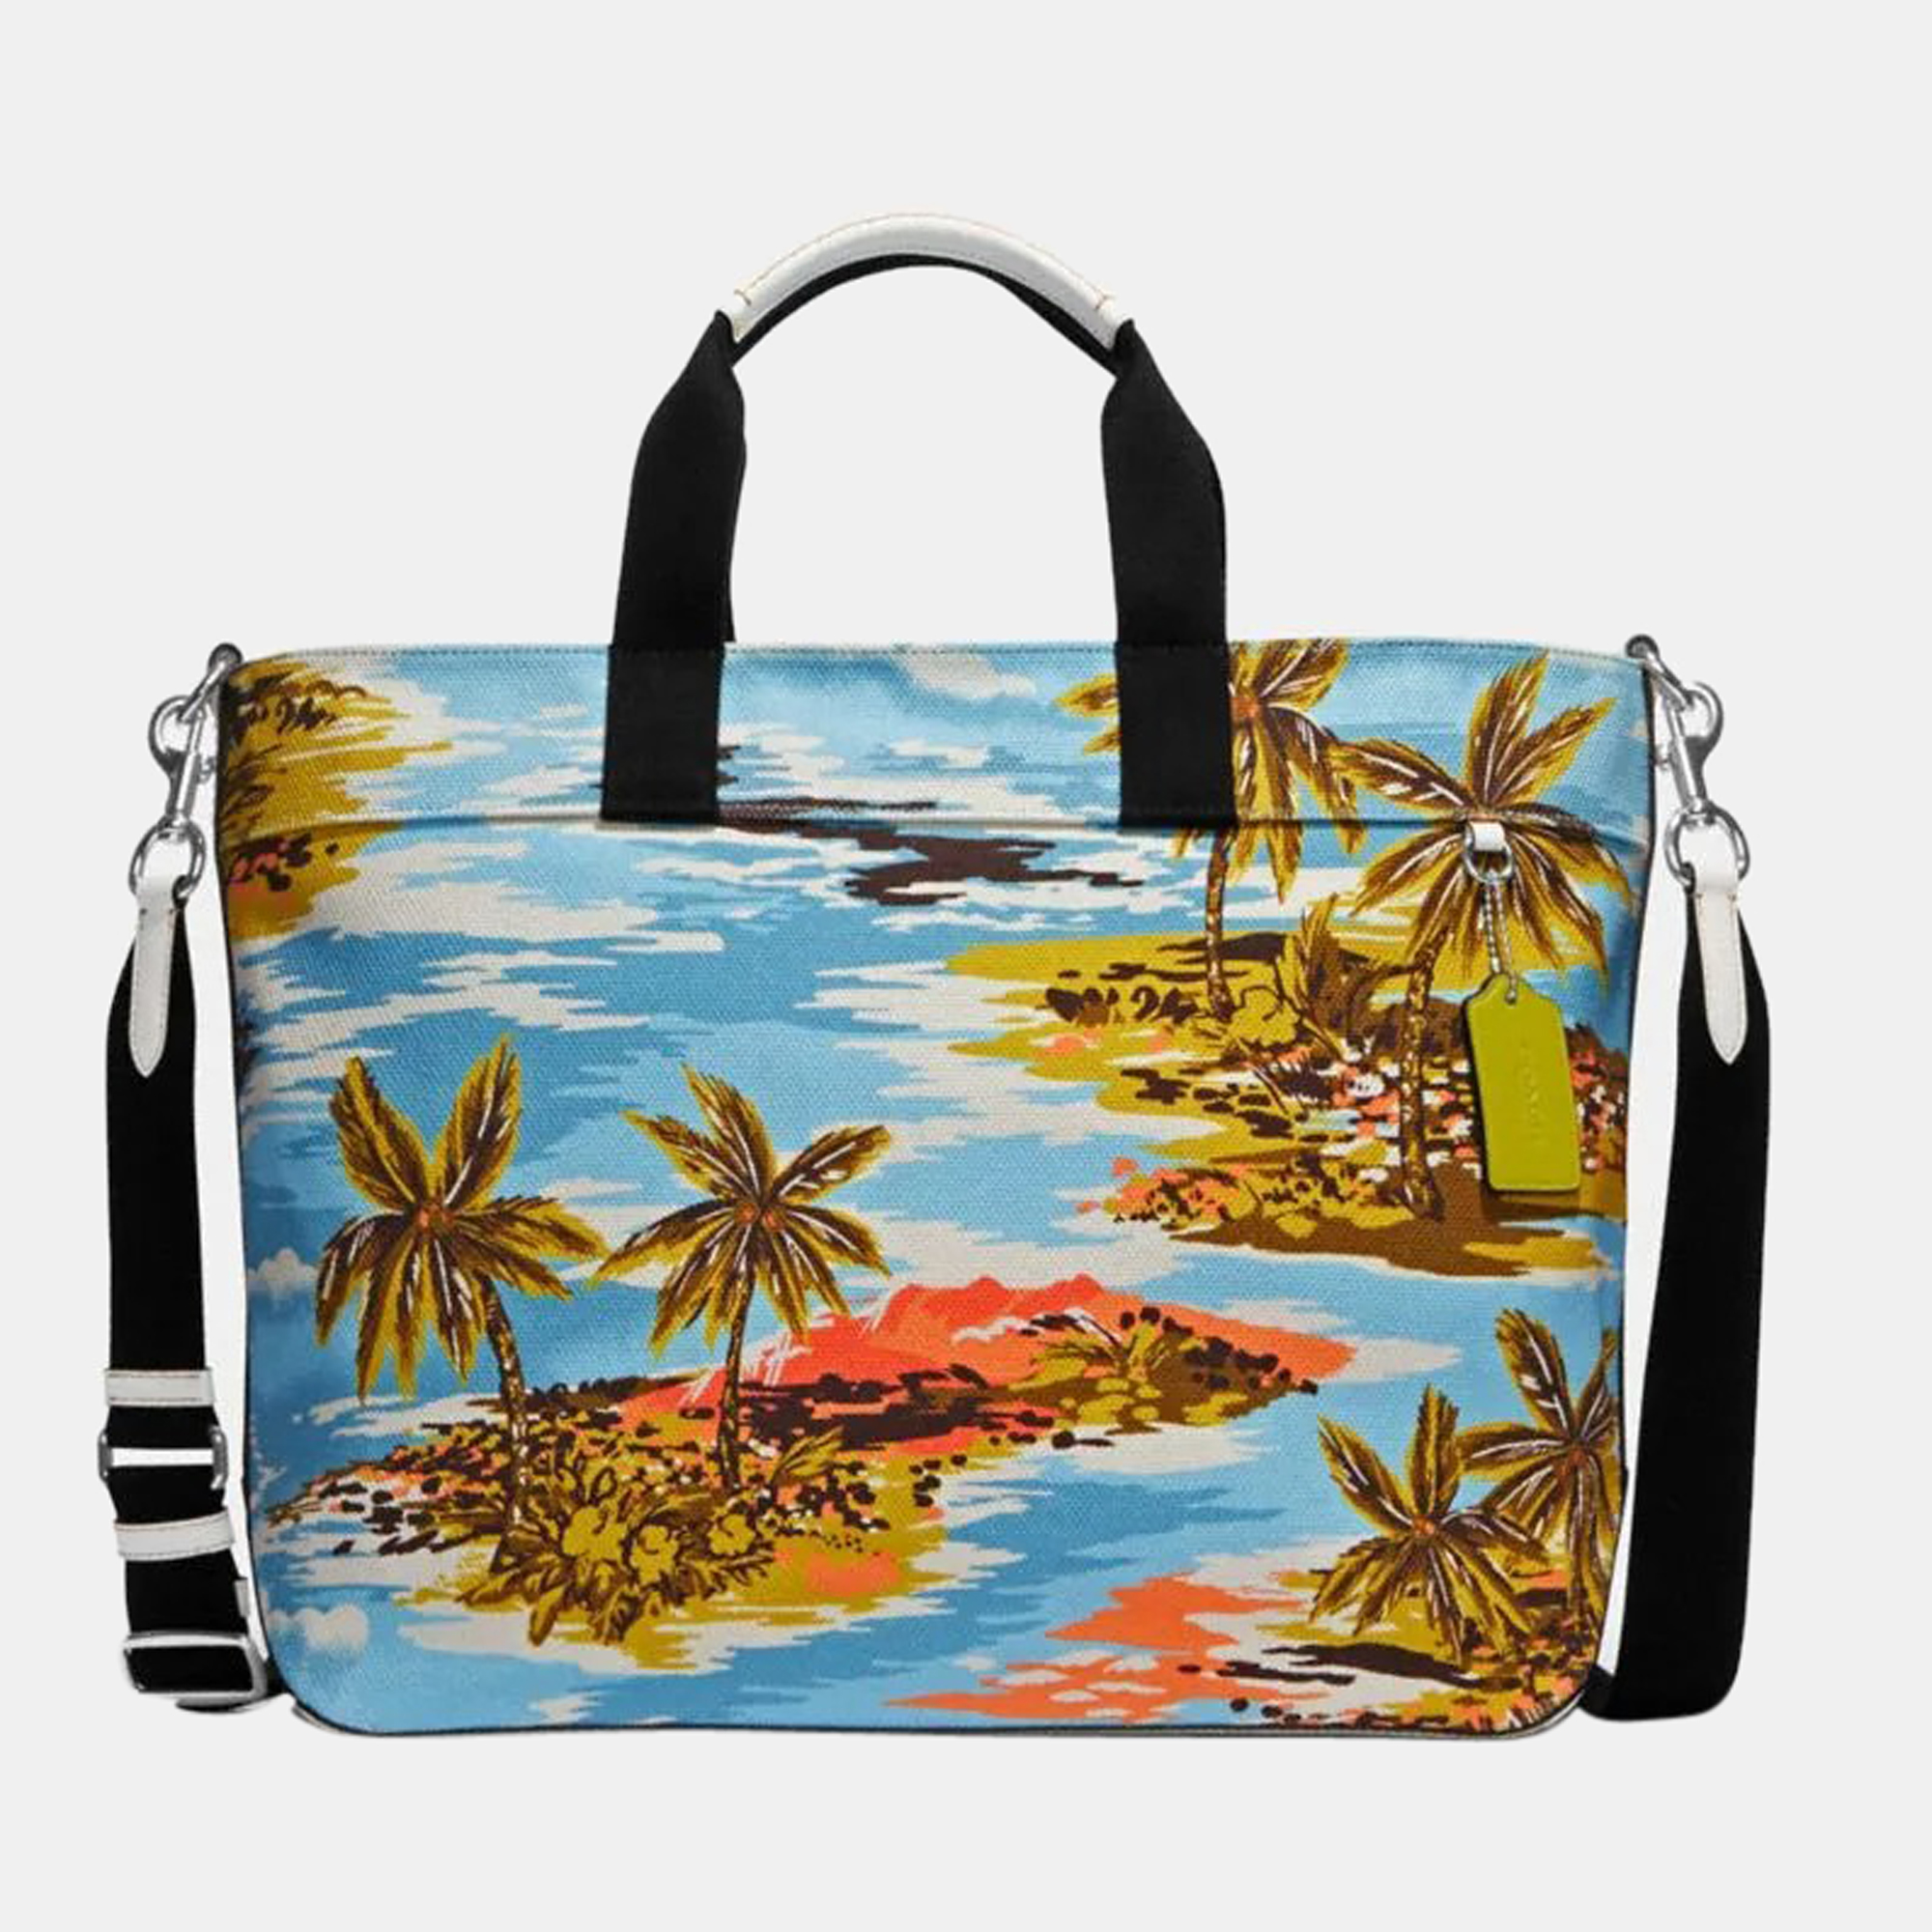 Coach Blue/Black - Canvas And Leather - Hawaiian Print Men's Tote